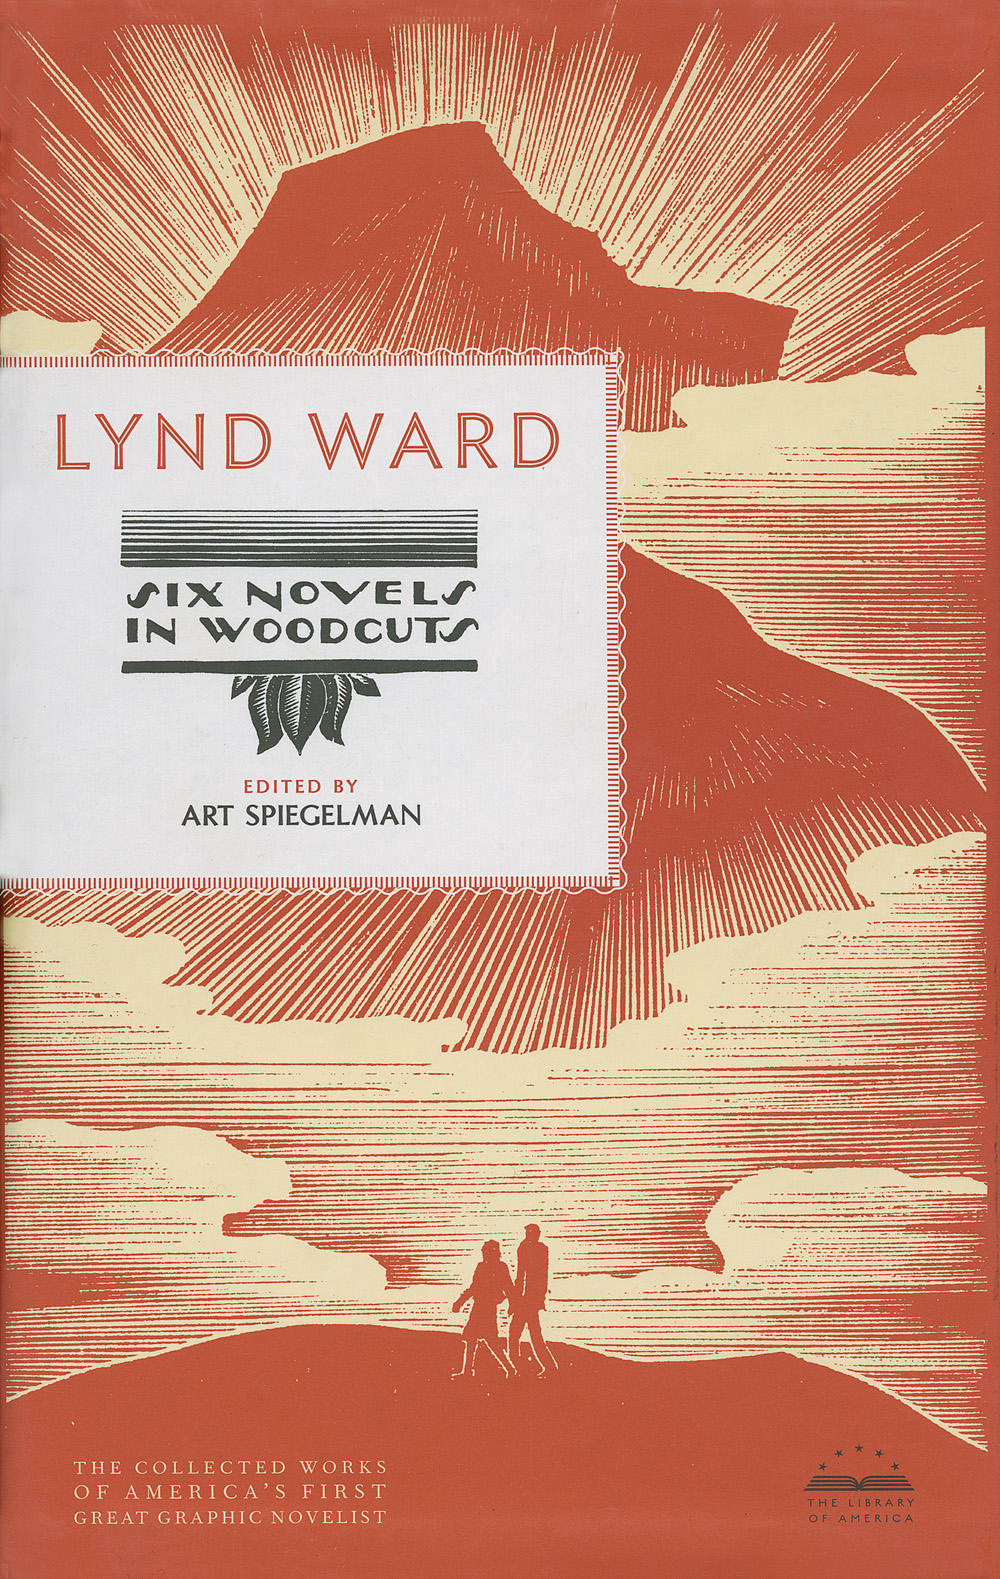  Lynd Ward, Slipcase cover of&nbsp; Six Novels in Woodcuts   Edited by Art Spiegelman, published by The Library of America  Scanning of the original Lynd Ward woodcuts by John Stinehour and Stephen Stinehour at Stinehour Editions. 